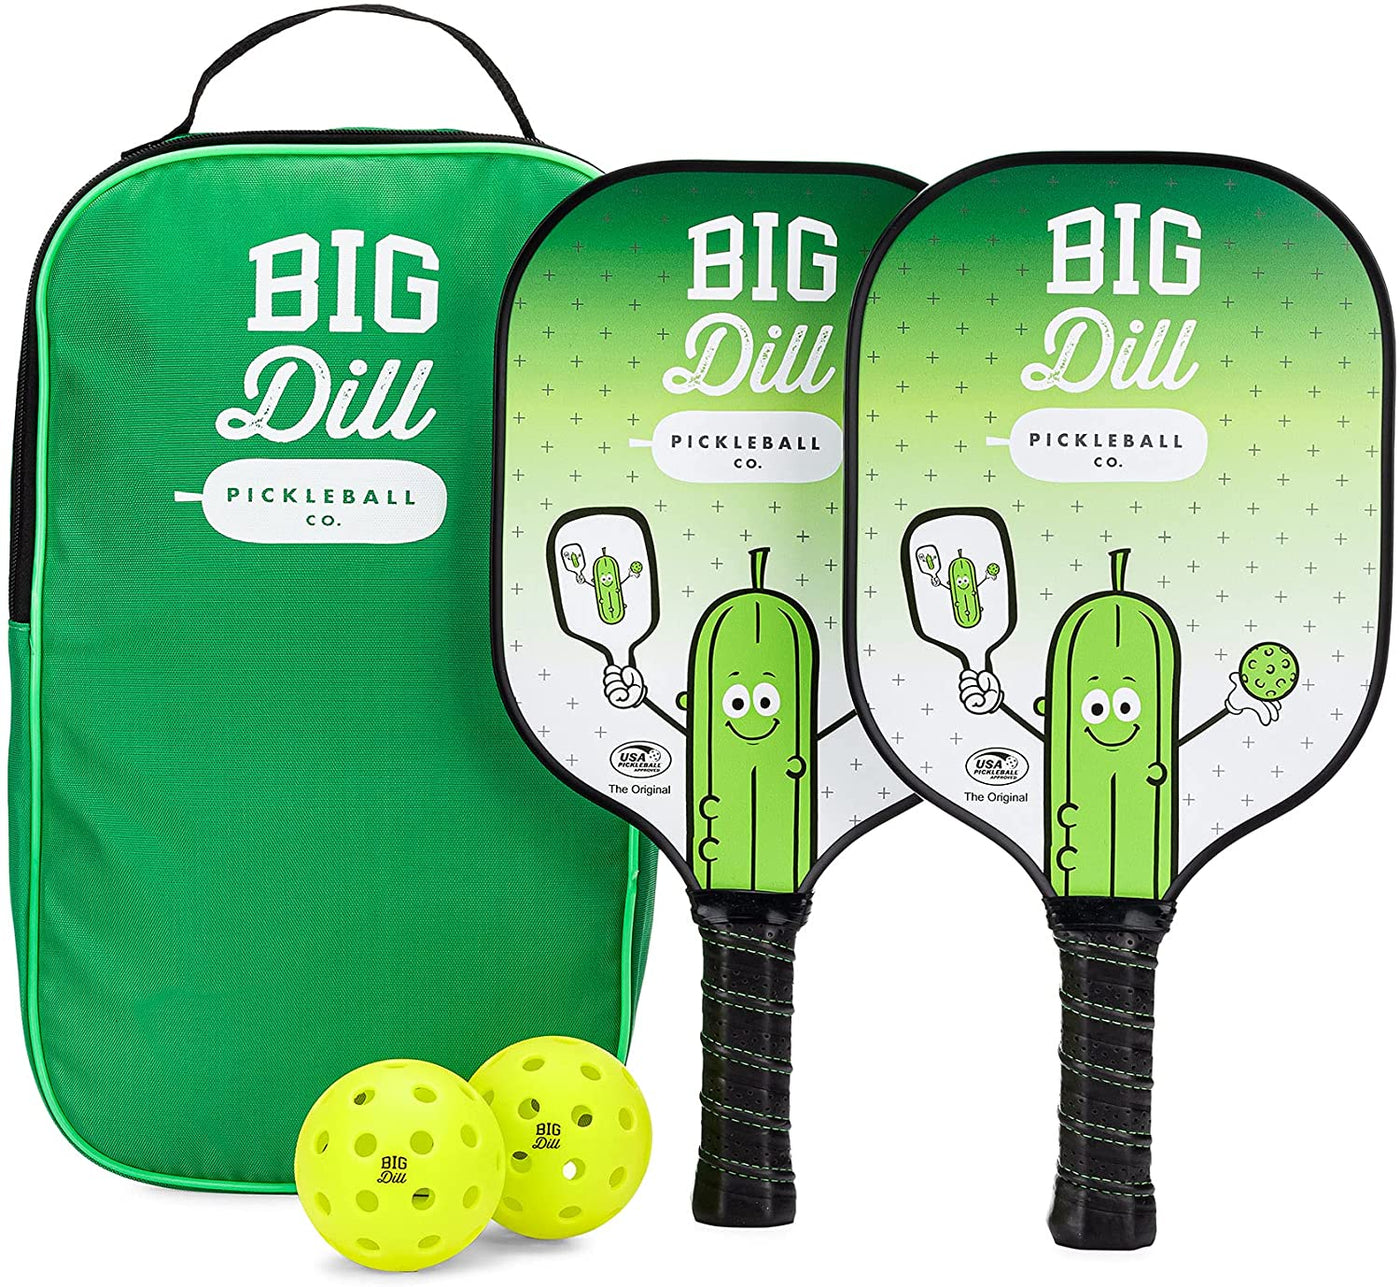 best pickleball paddles for 3.5 players